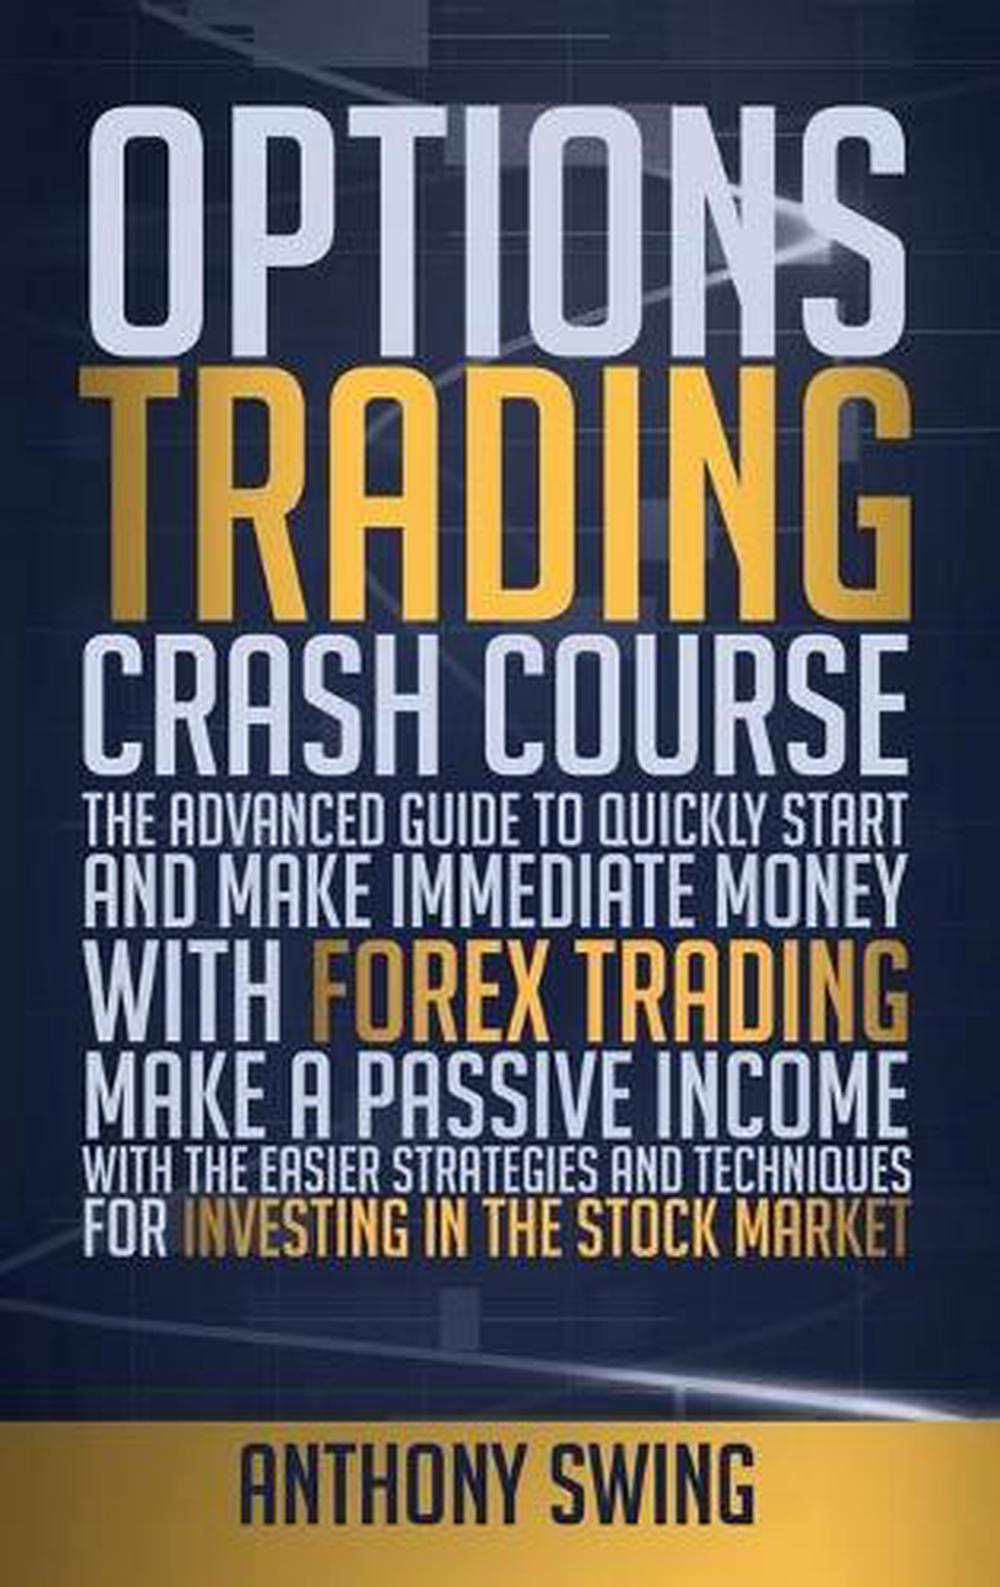 Options Trading Crash Course by Anthony Swing (English) Hardcover Book Free Ship 9781801259224